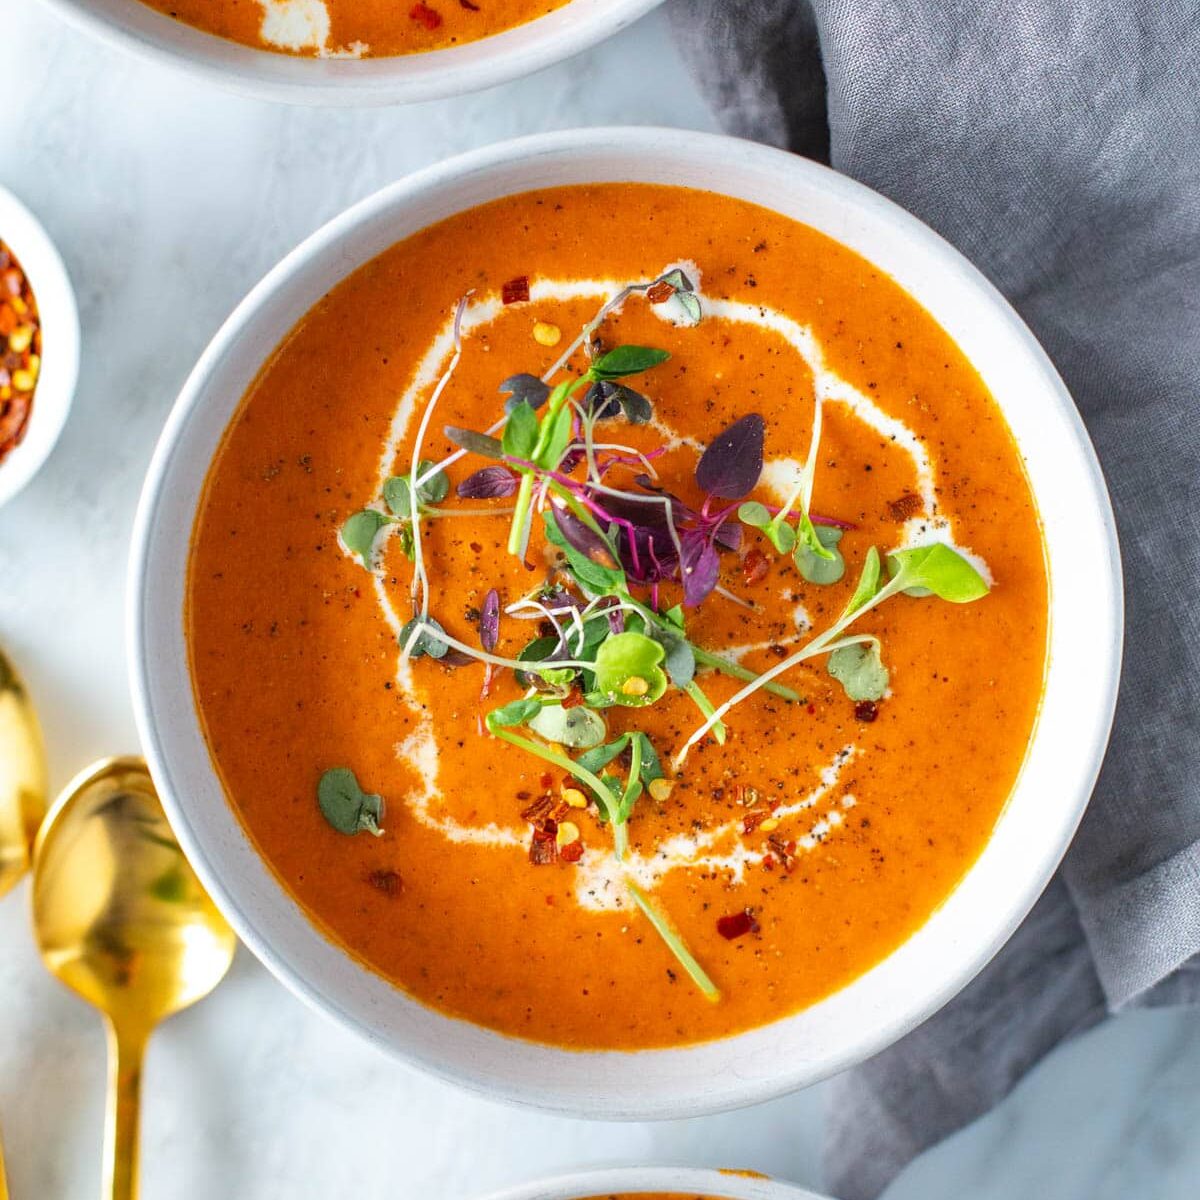 A close-up of a bowl of roasted red pepper soup topped with heavy cream and microgreens.